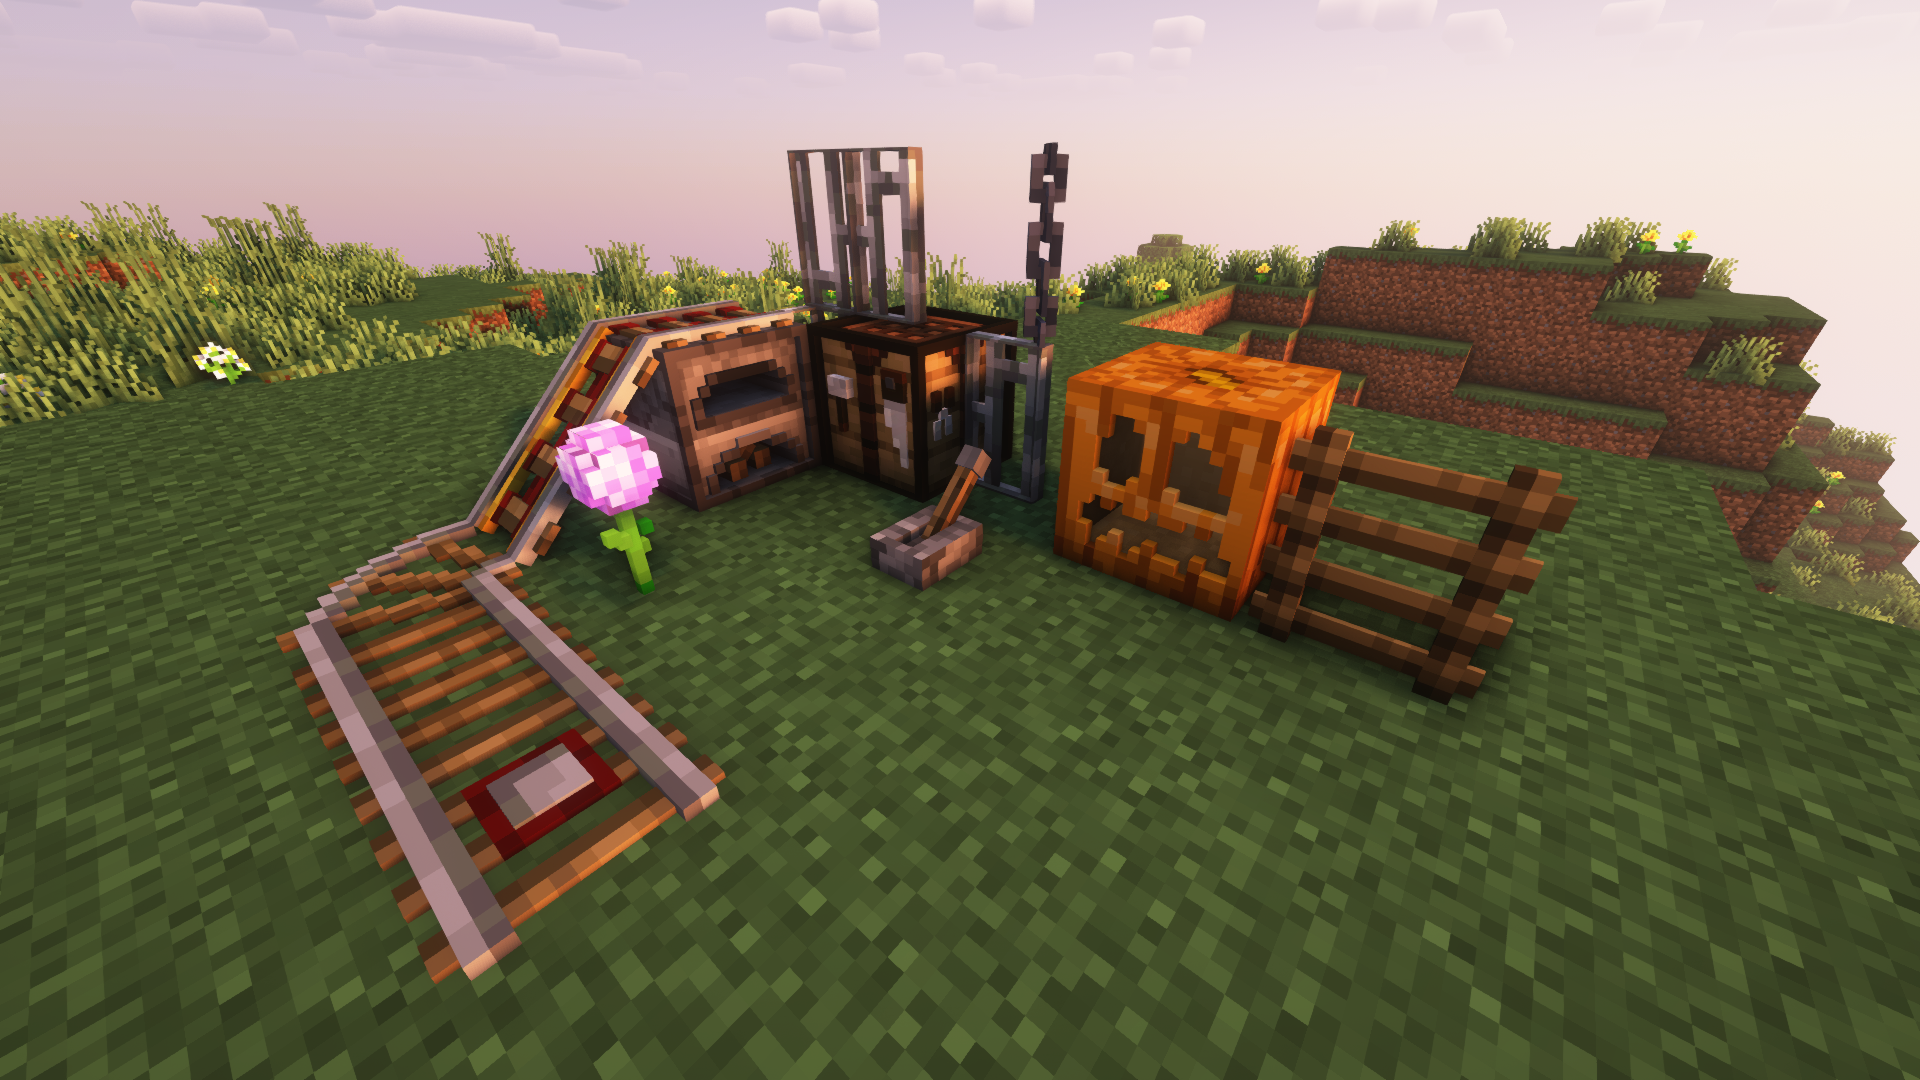 Includes all types of rail, lever, Allium, ladder, carved pumpkin, crafting table, iron bars, chain and the Furnace blocks.

Taken with Complementary Reimagined shaders.